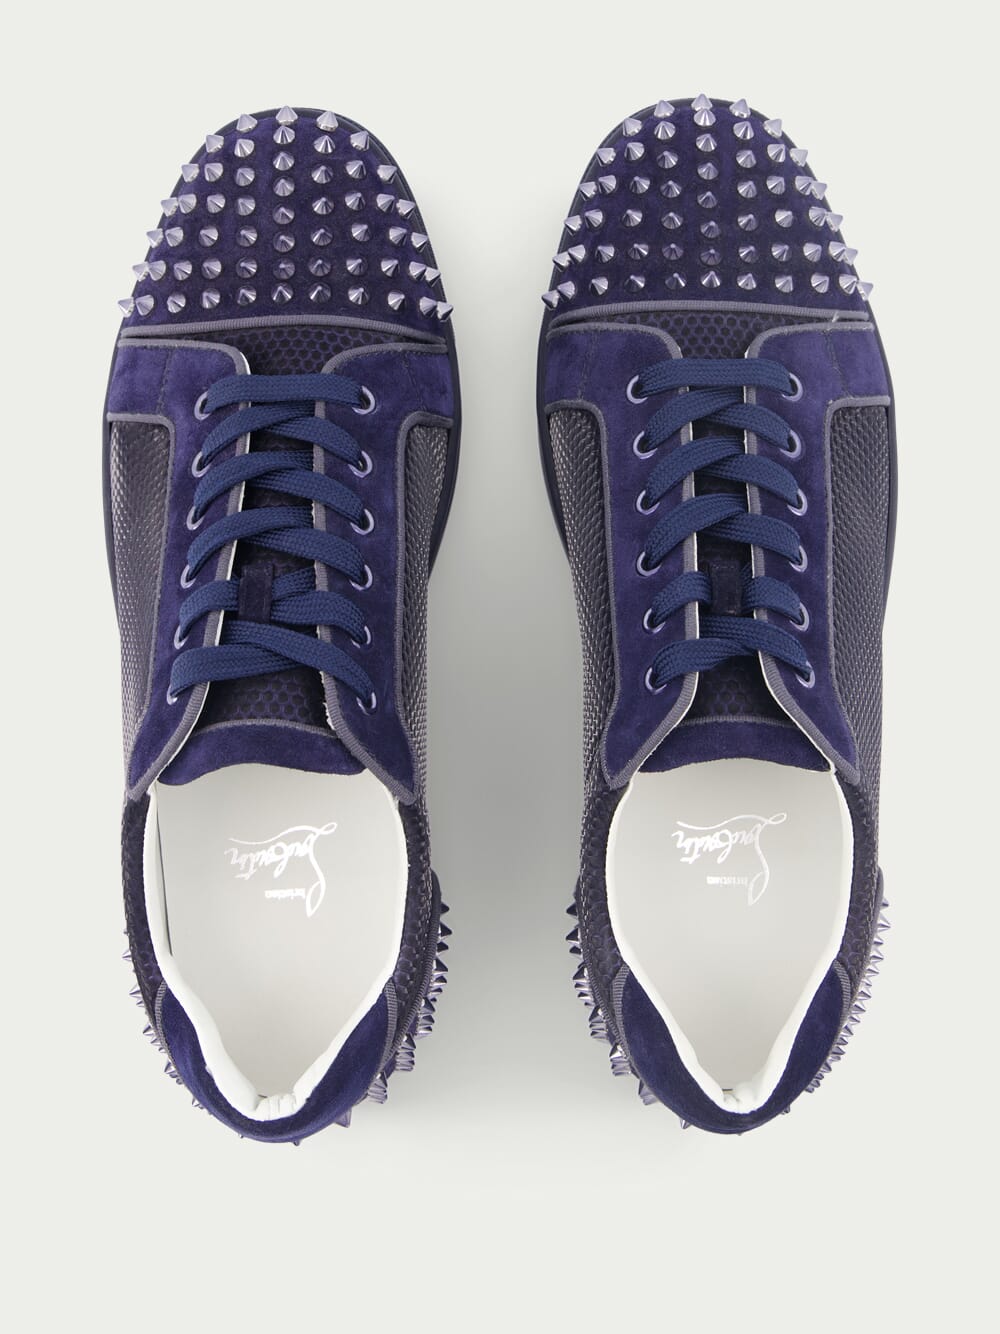 Christian LouboutinSeavaste 2 low-top veau velours sneakers at Fashion Clinic